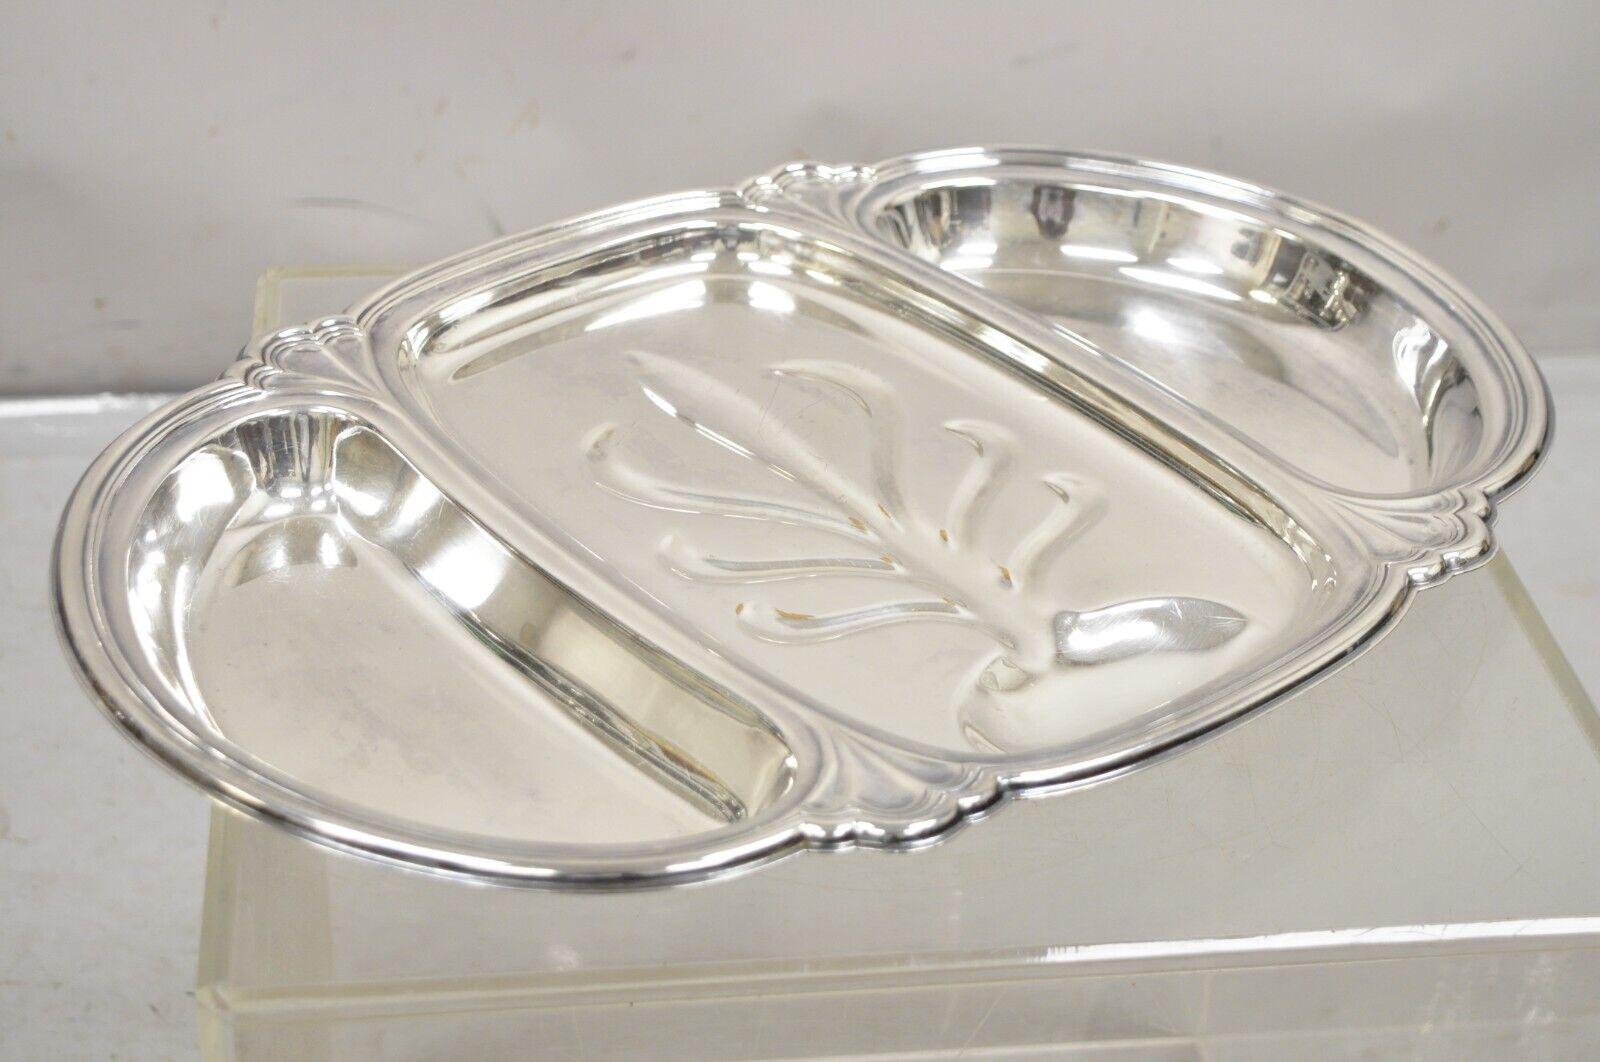 Vintage English Victorian Style 3 Section Silver Plated Meat Cutlery Serving Platter Tray. Circa Mid to Late 20th Century. Measurements:  1.25